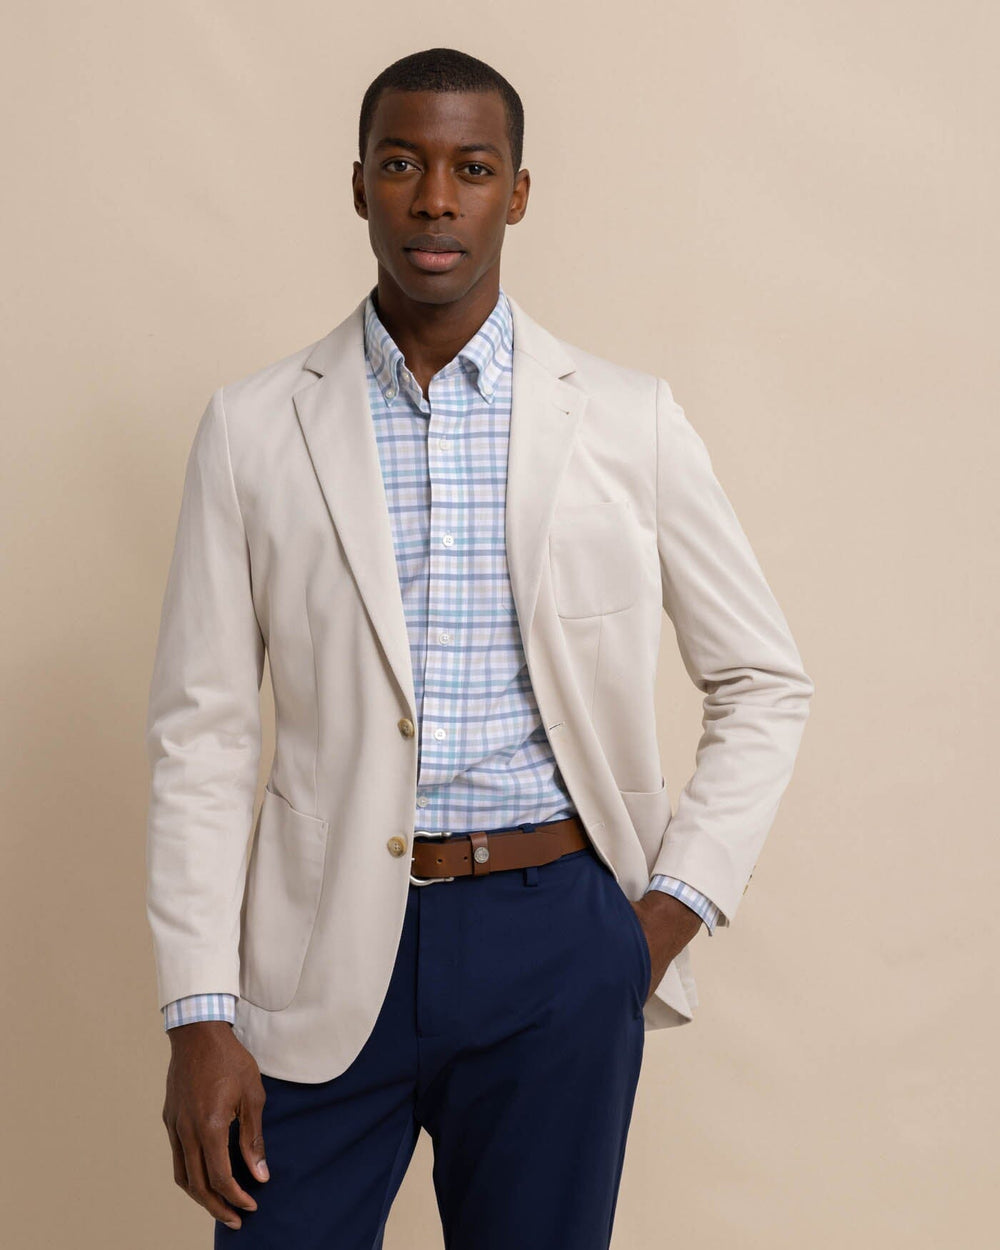 The front view of the Southern Tide charleston-navy-blazer by Southern Tide - Perfectly Pale Khaki